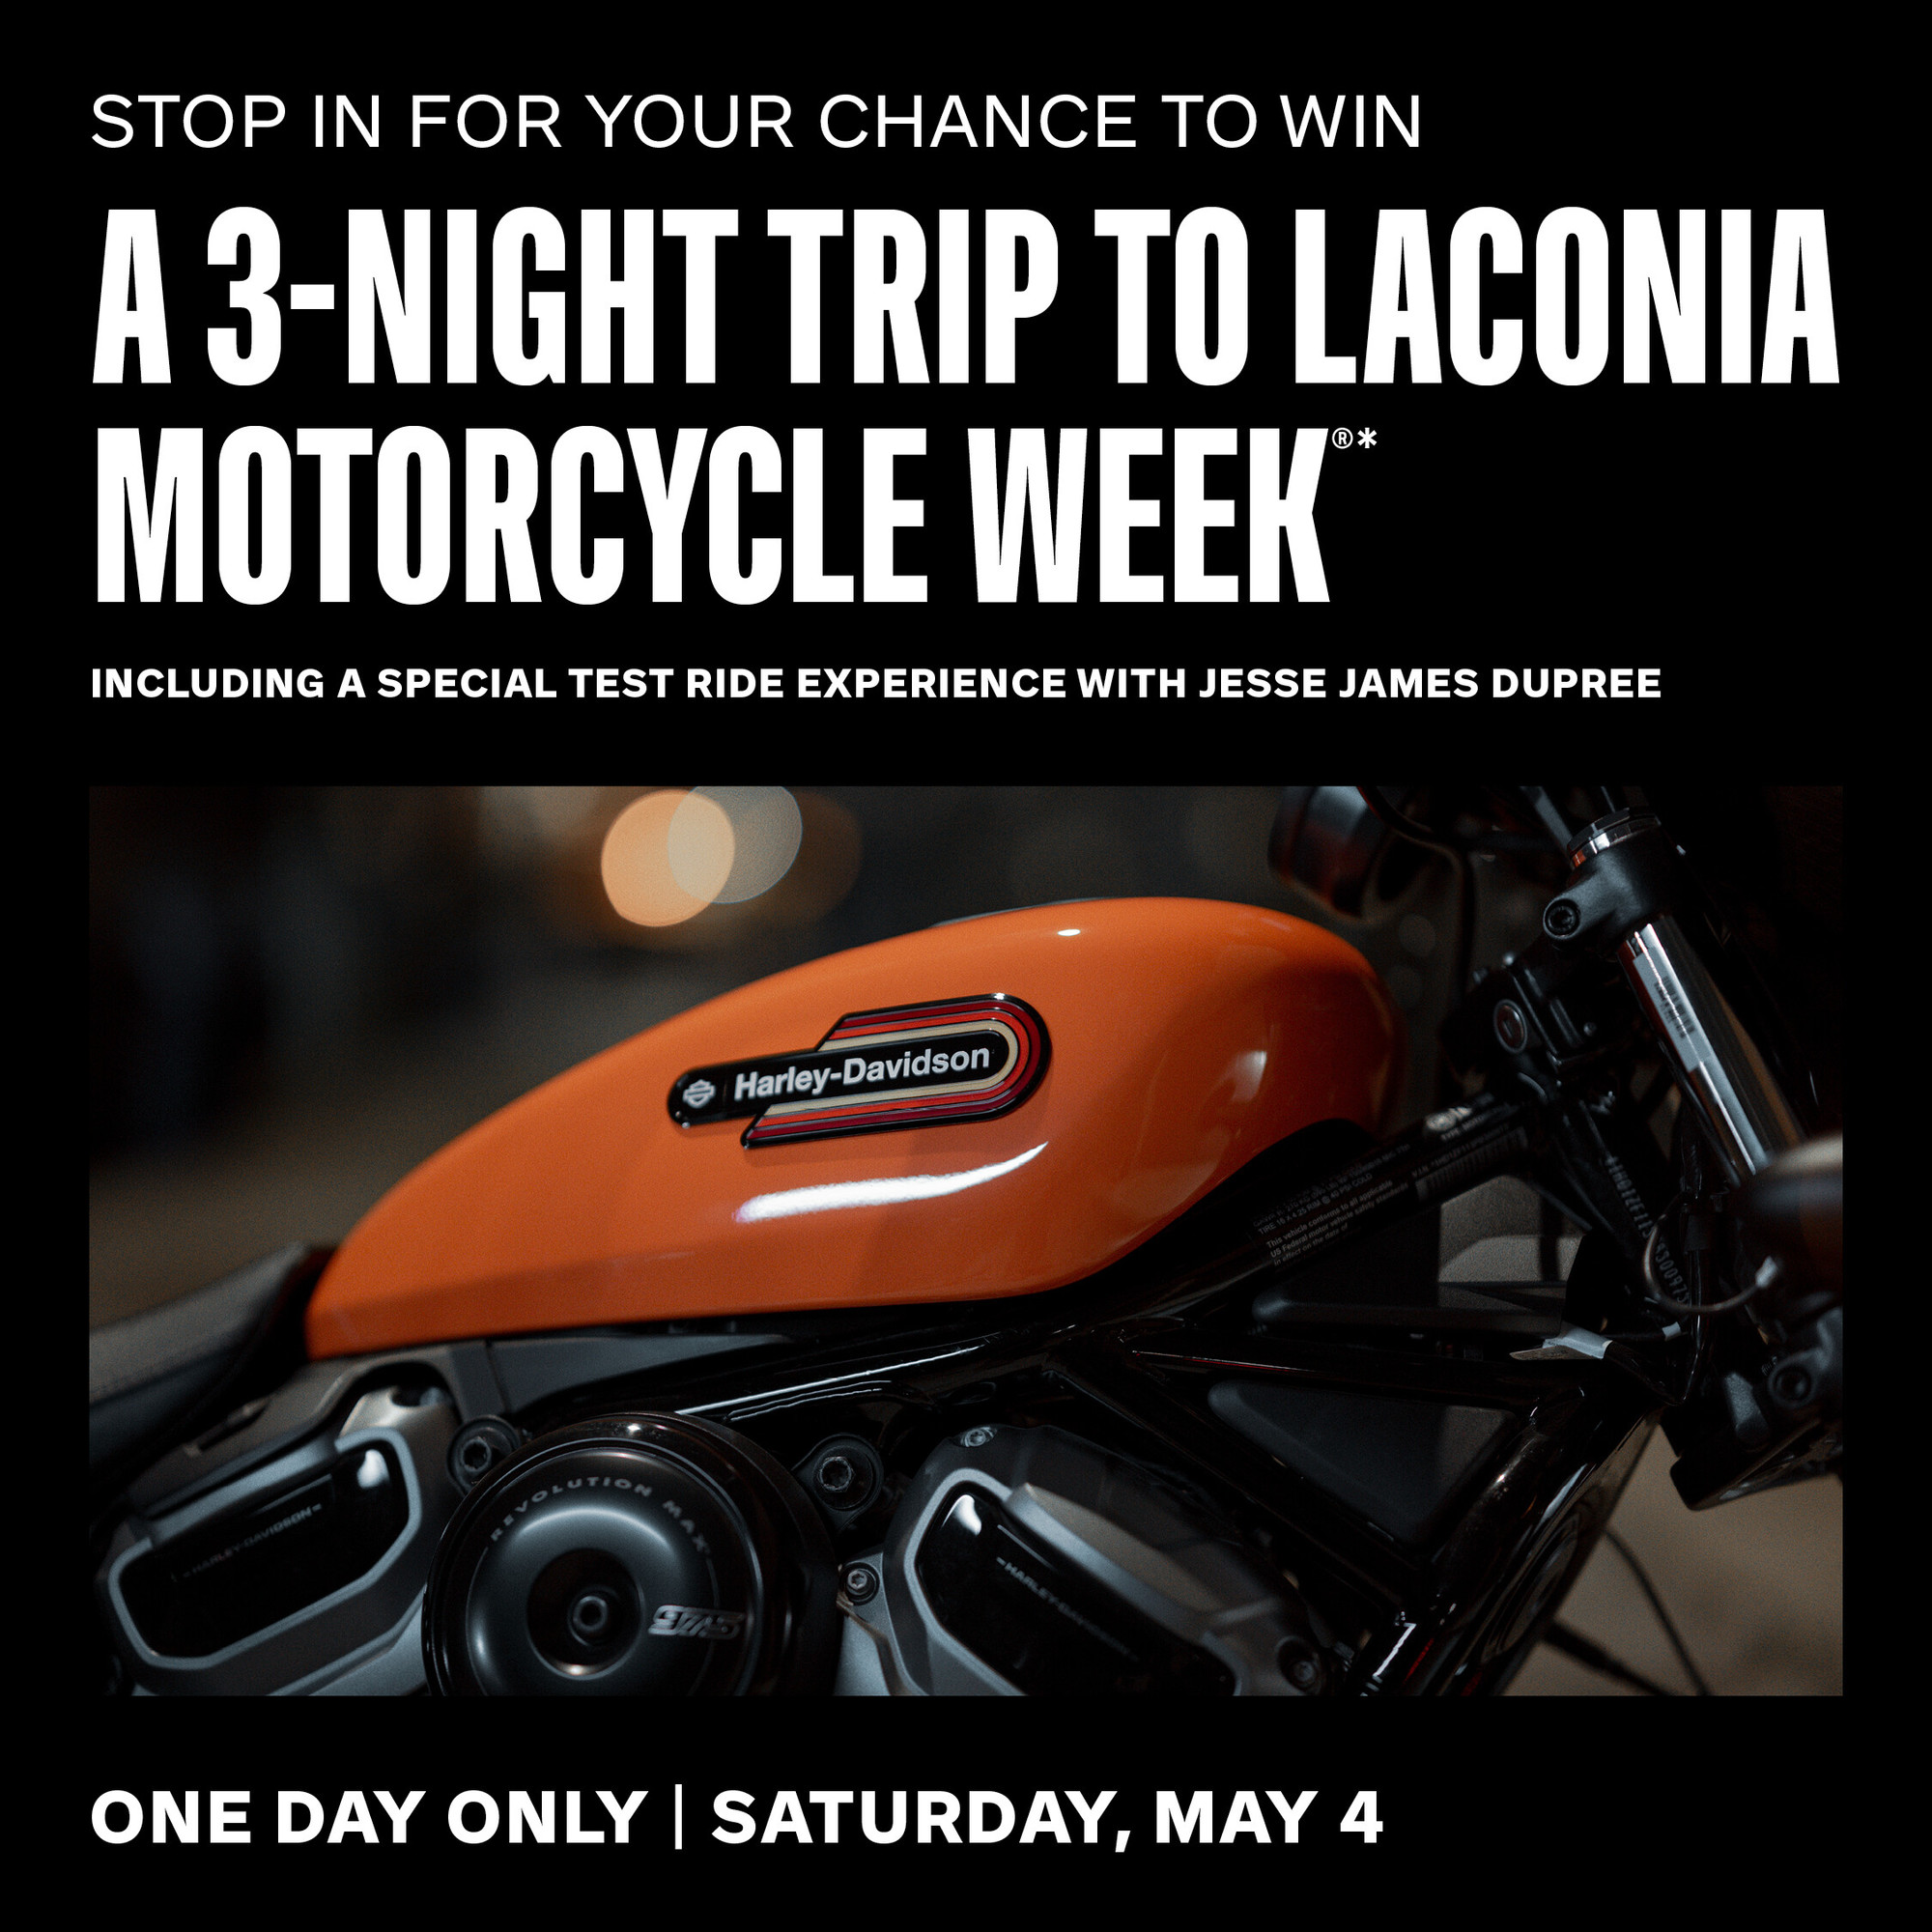 Win a 3 Night Trip to Laconia Motorcycle Week